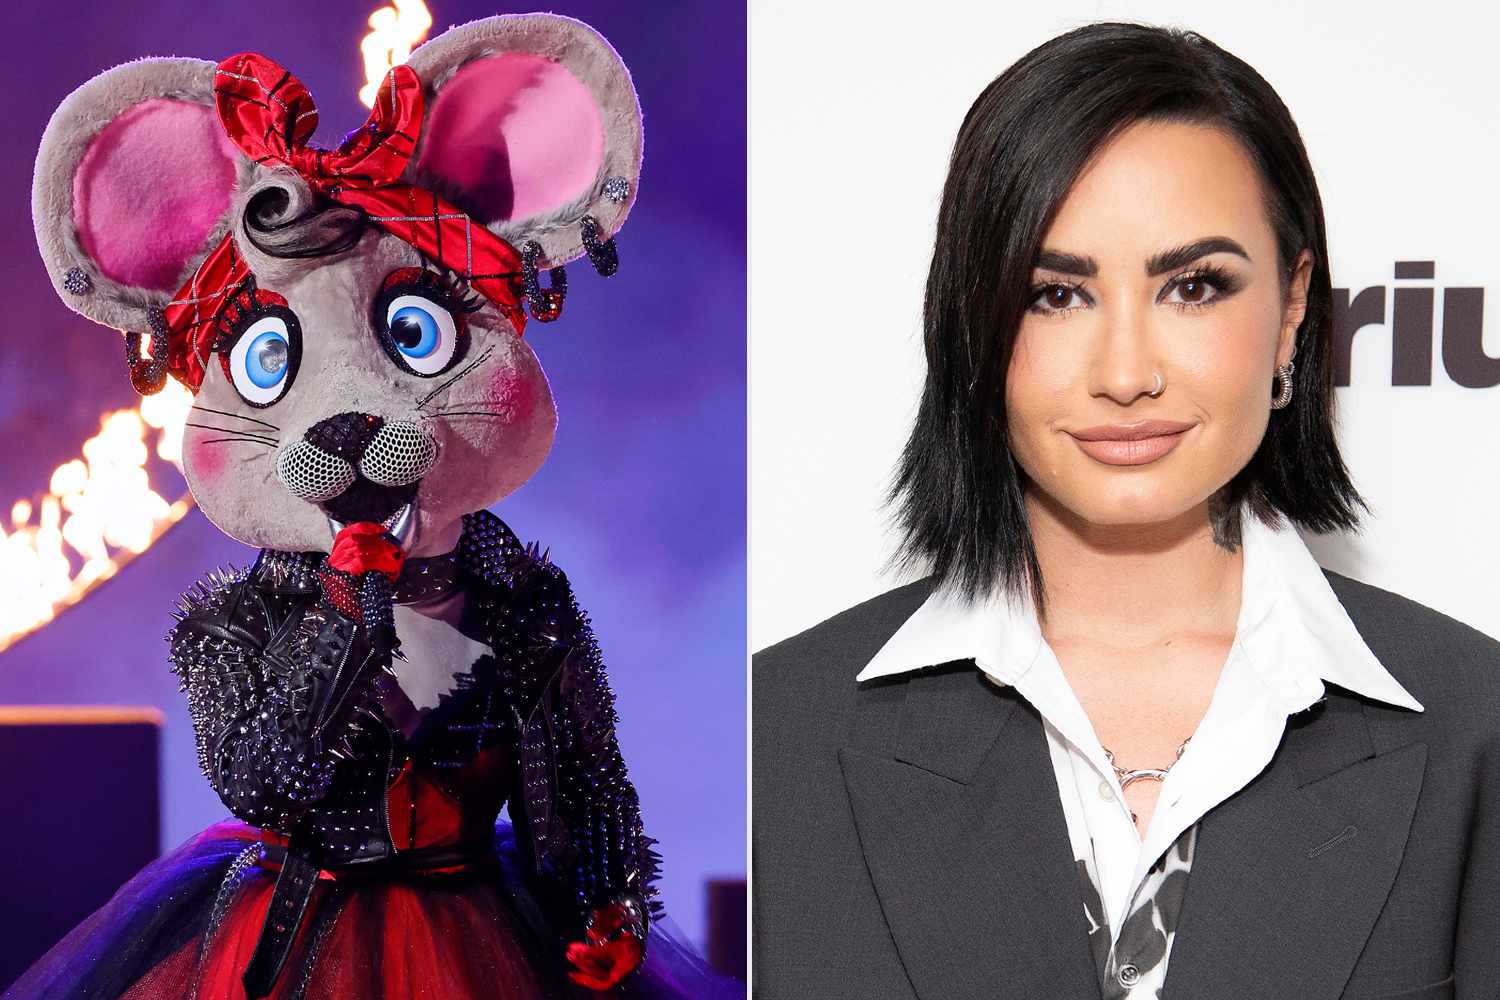 Anonymouse and Demi Lovato